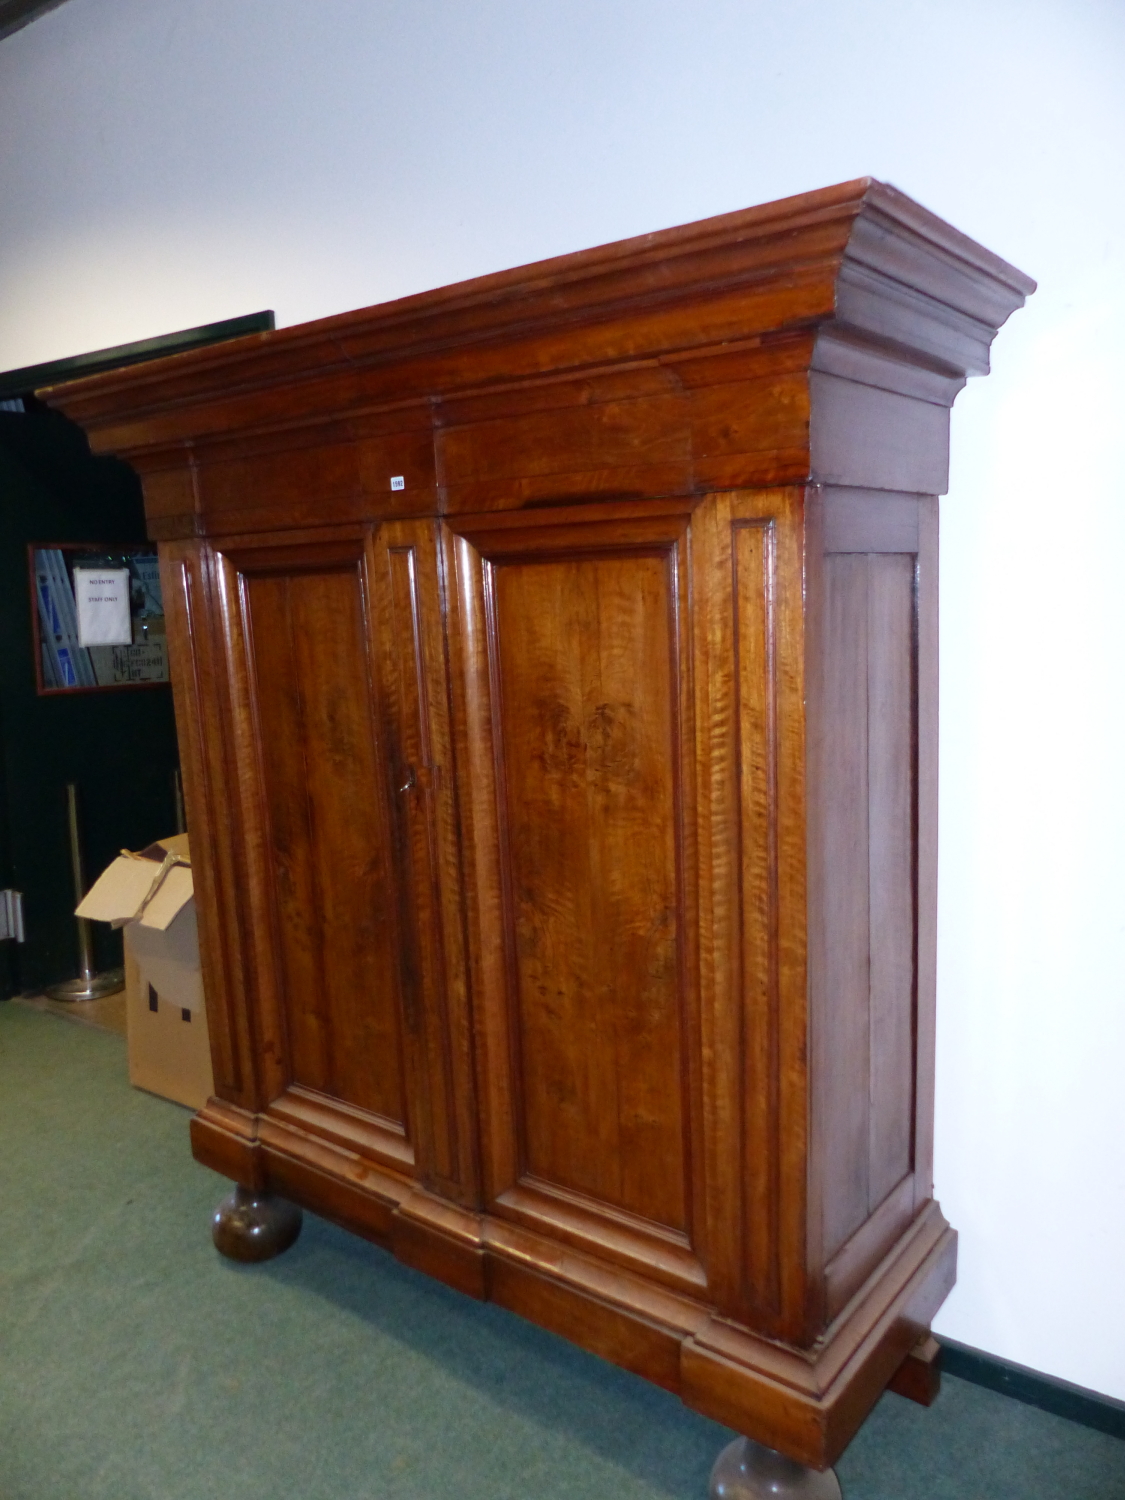 AN EARLY CONTINENTAL WALNUT BAROQUE STYLE ARMOIRE OF HEAVY CONSTRUCTION WITH MOULDED CORNICE, TWIN - Image 2 of 4